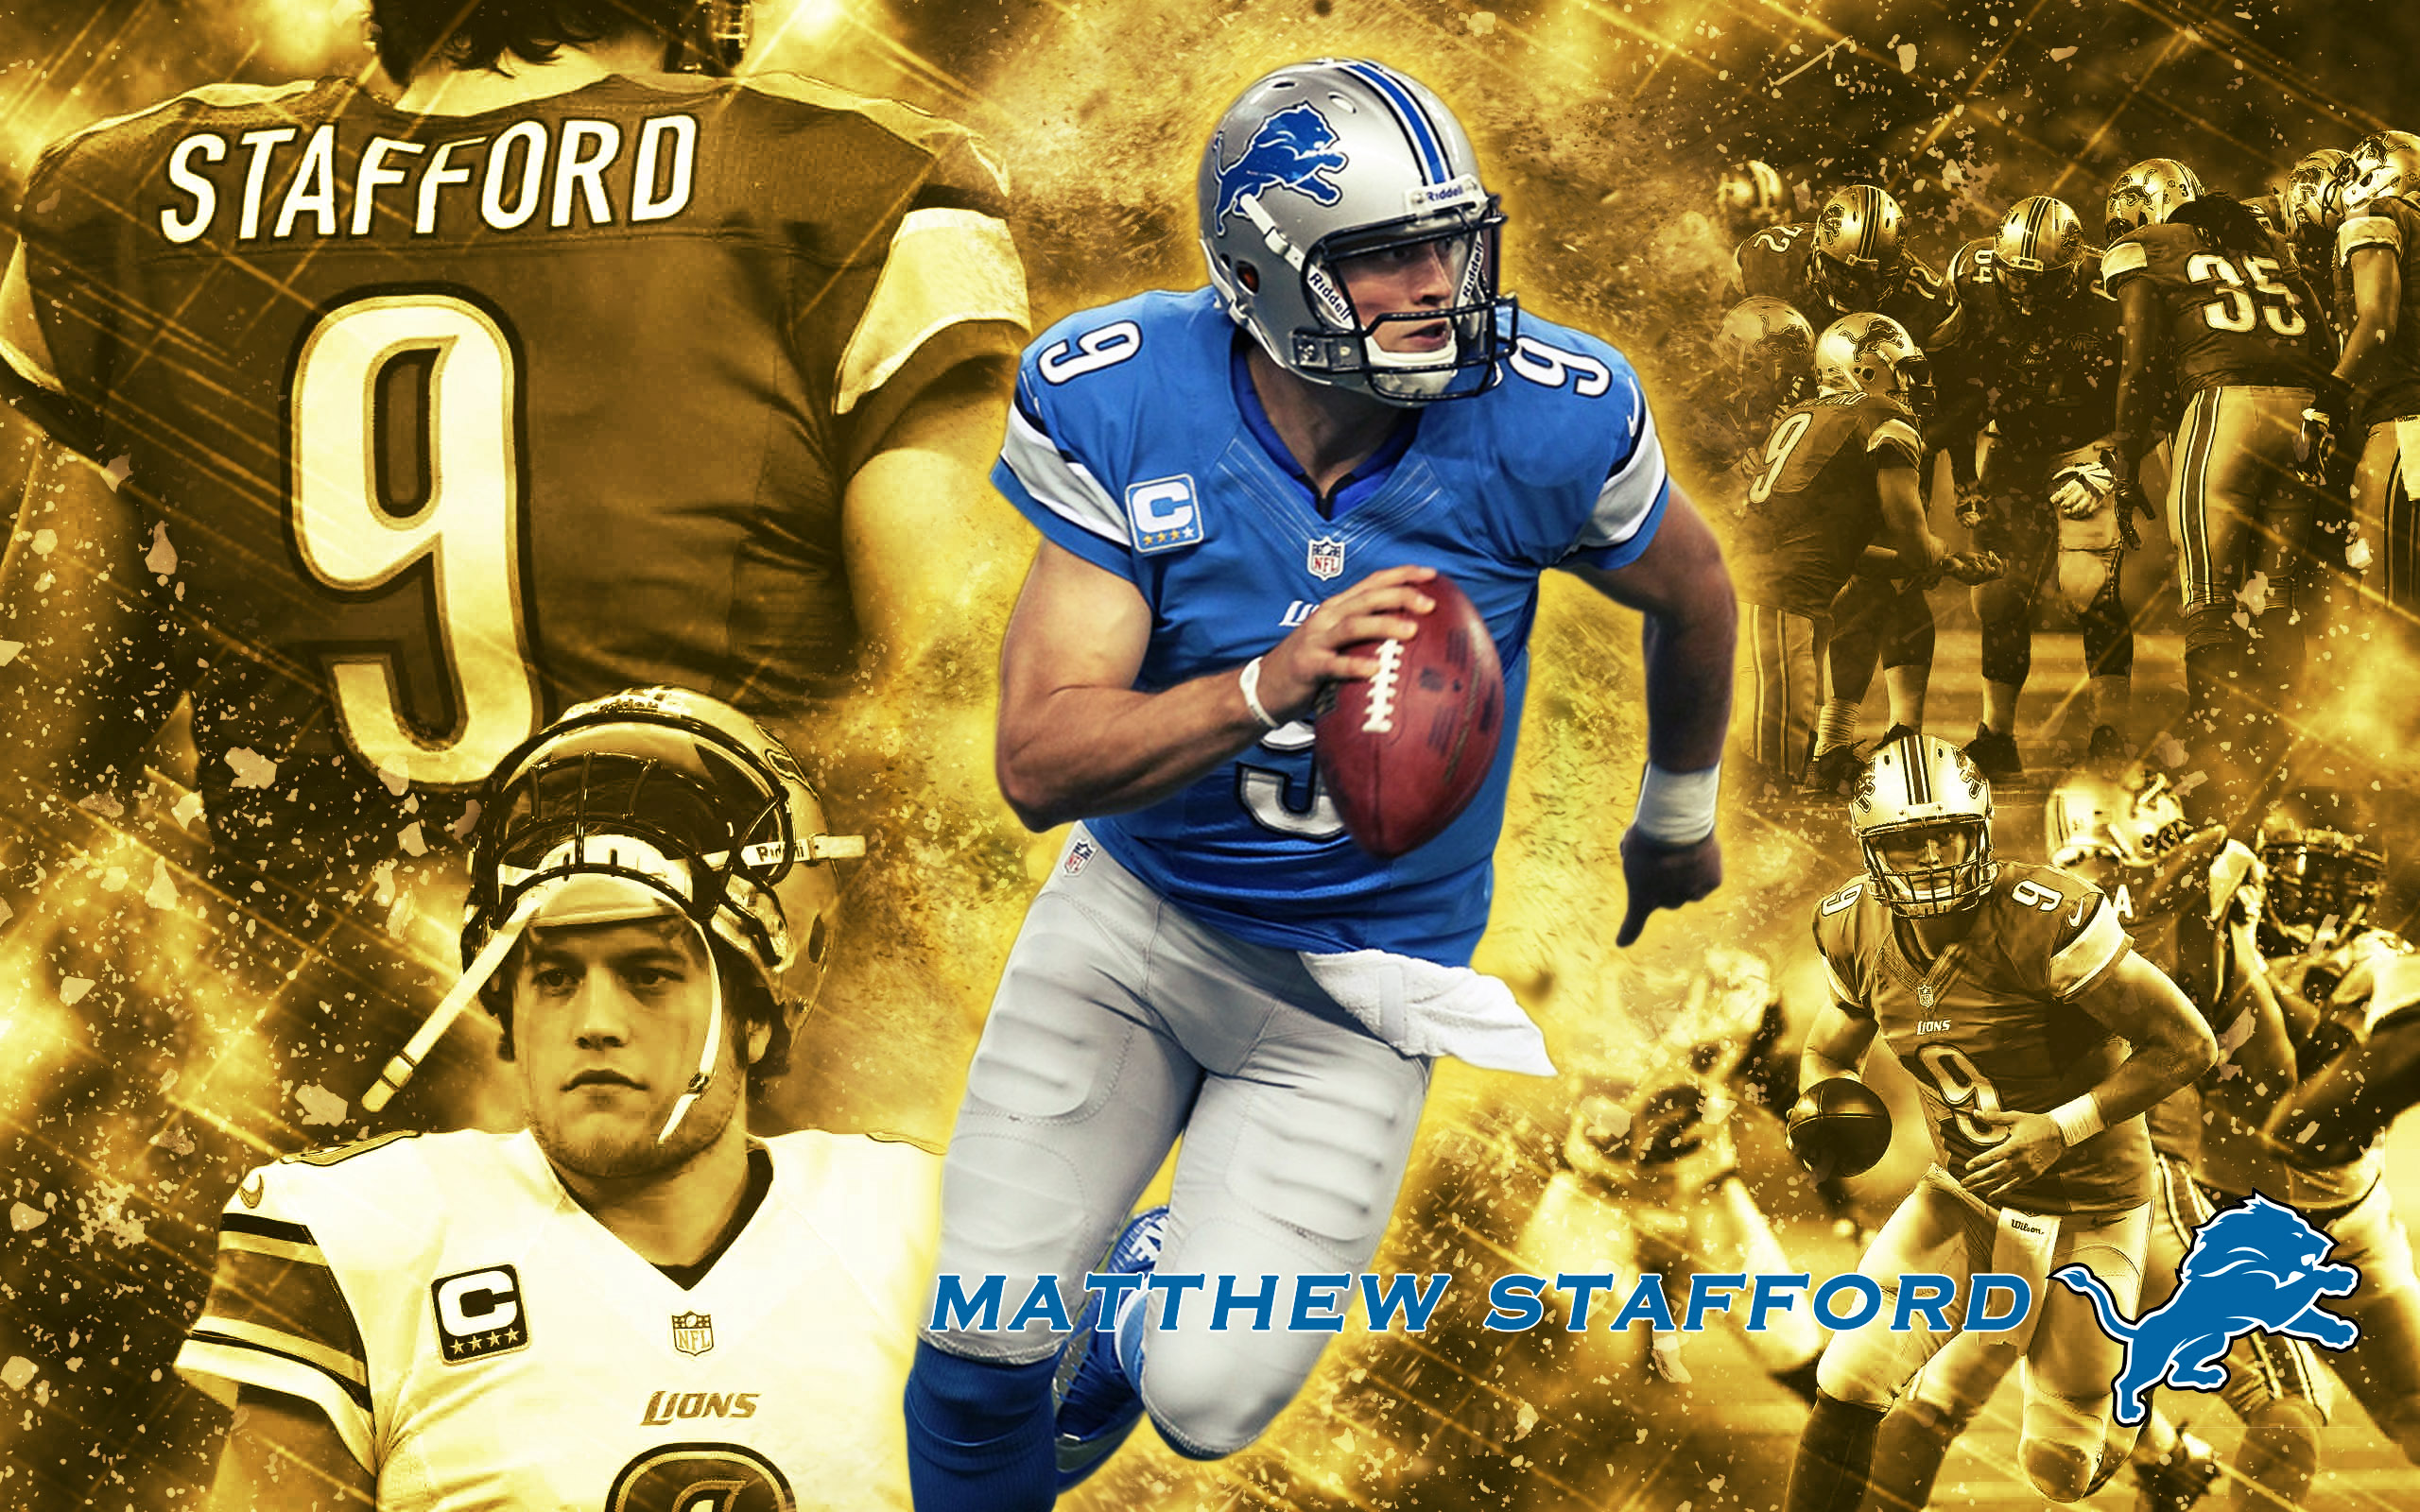 View Larger Image - Matthew Stafford And Golden Tate , HD Wallpaper & Backgrounds